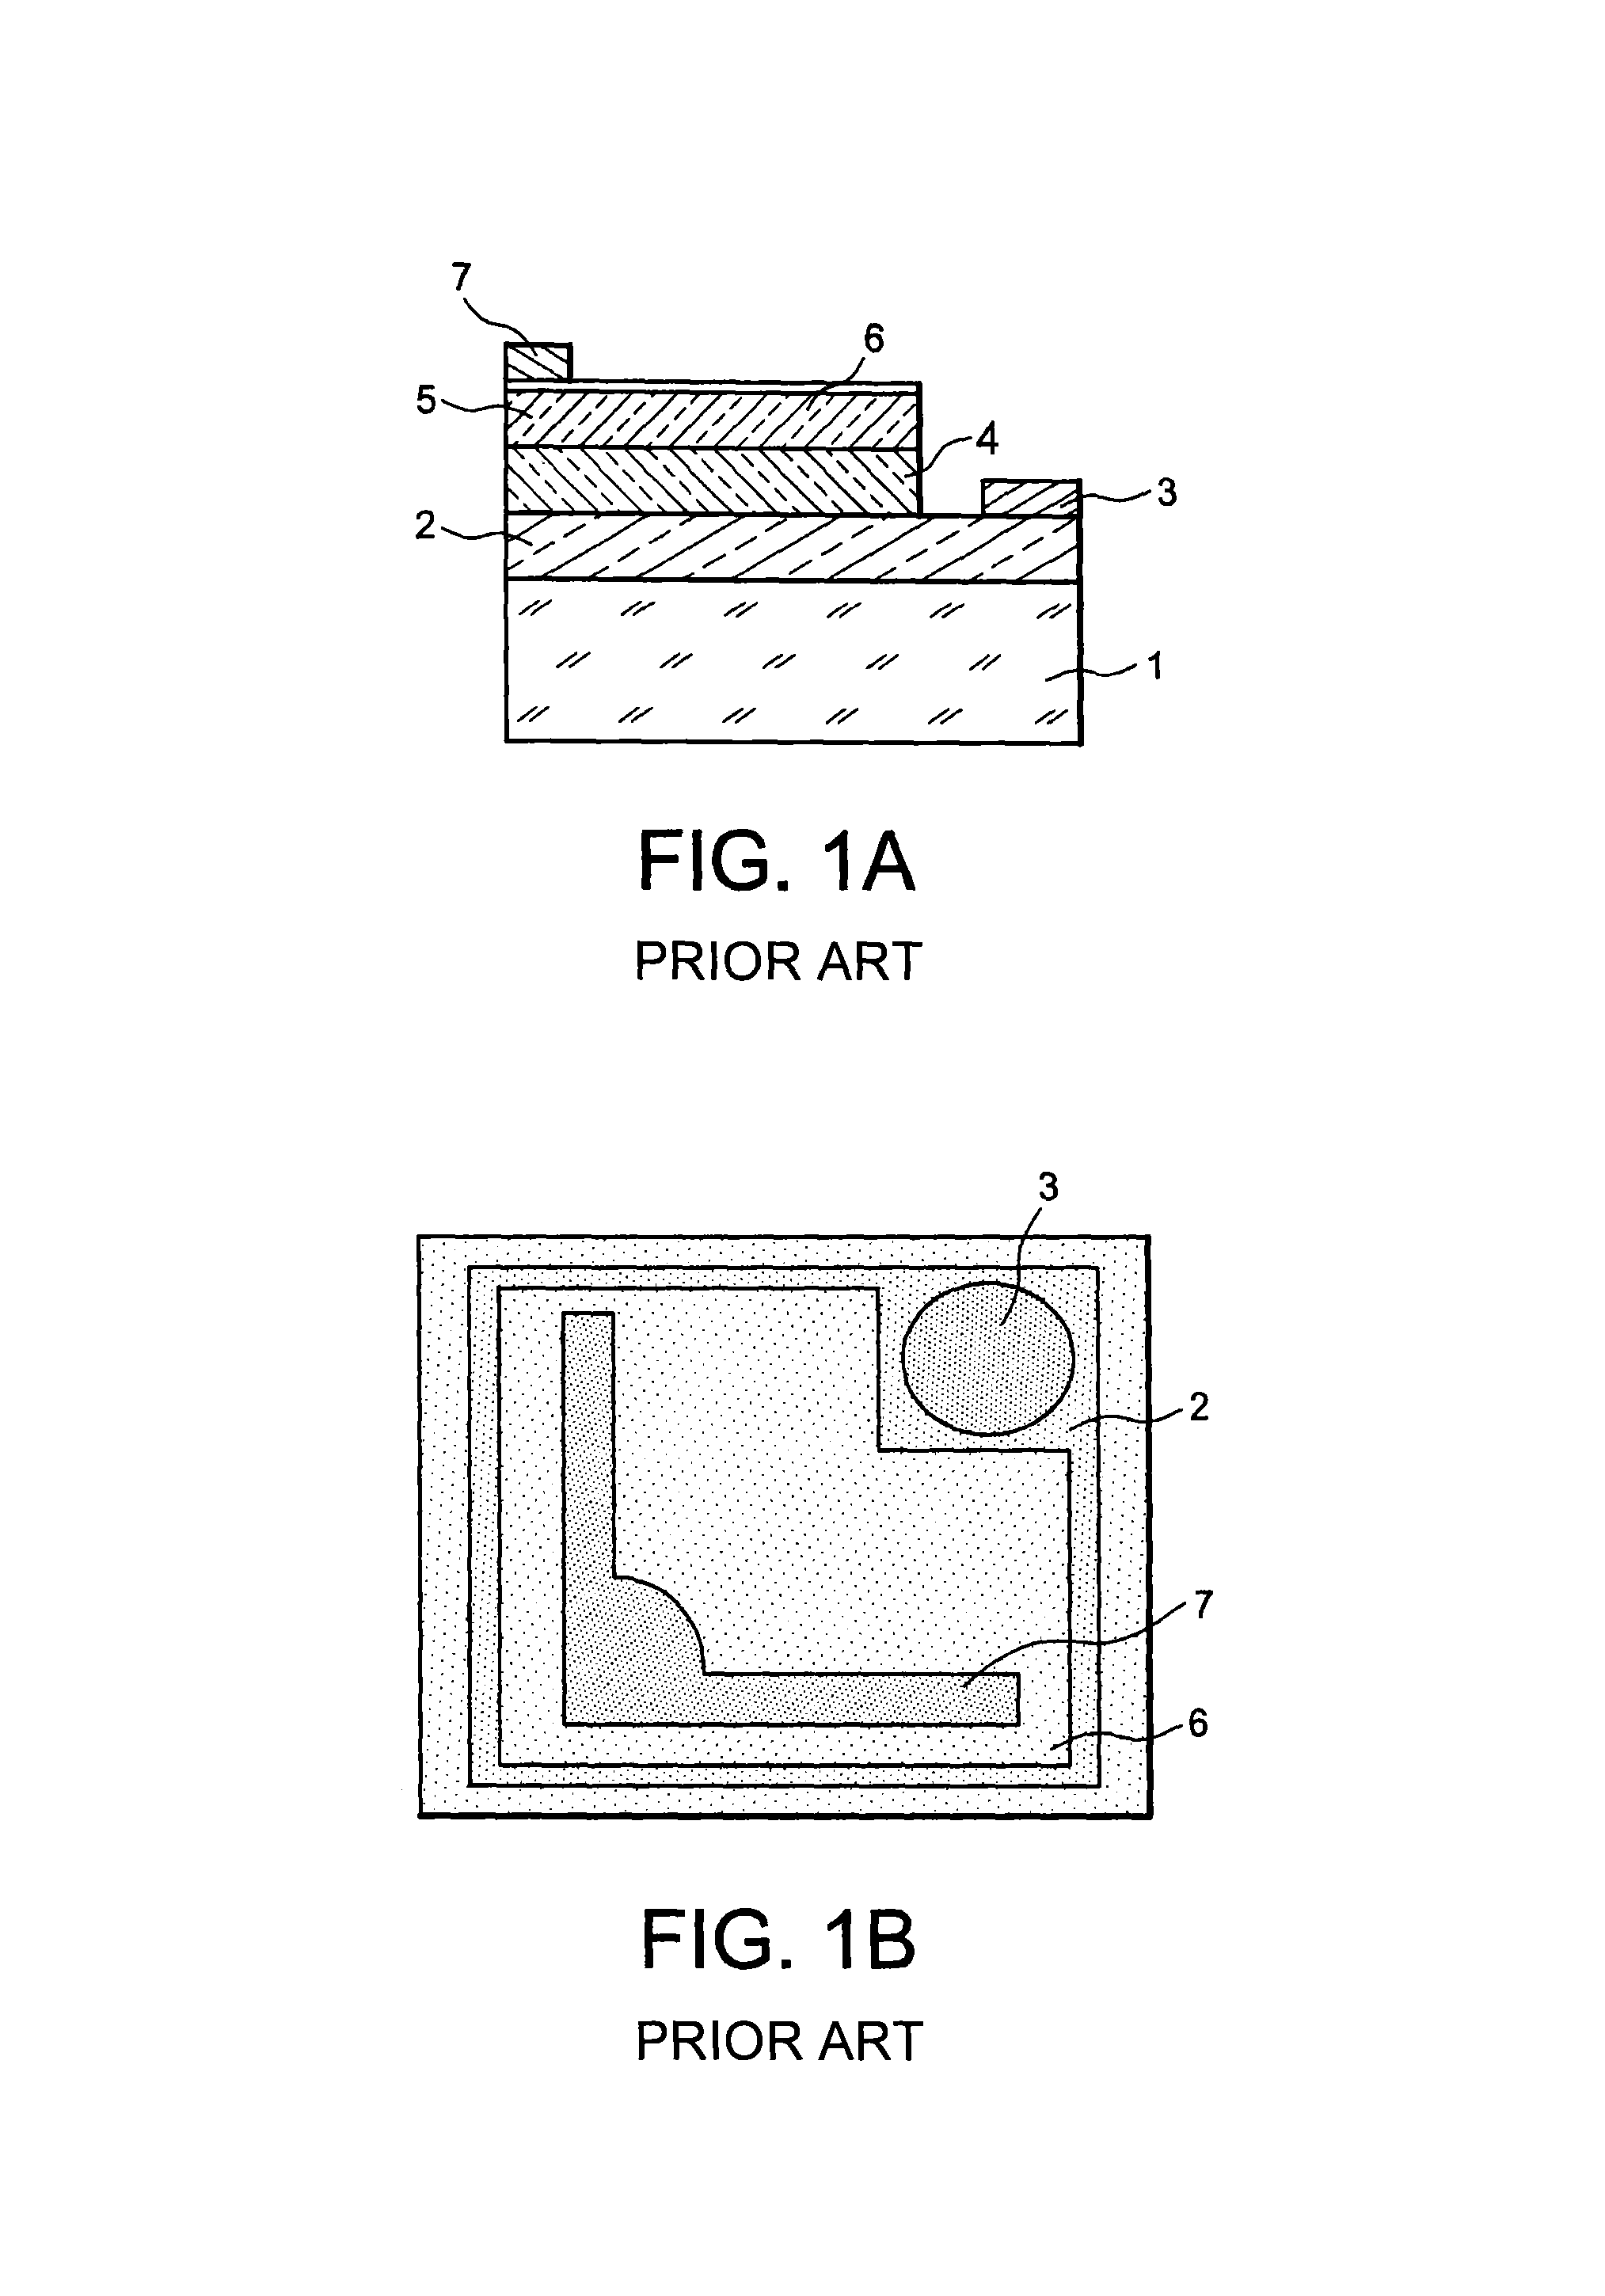 Method for making a light-emitting microelectronic device with semi-conducting nanowires formed on a metal substrate